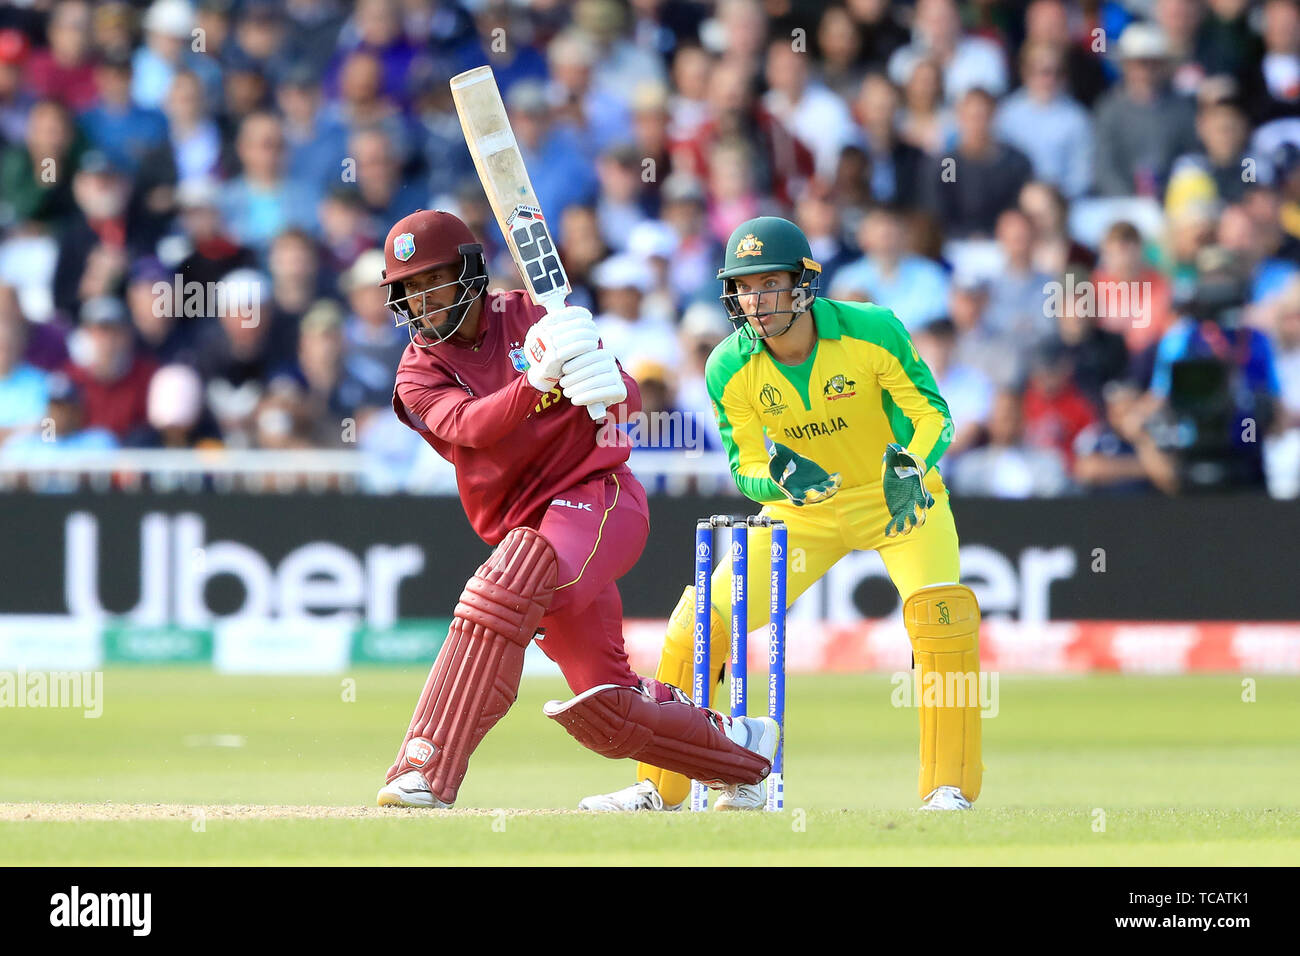 West Indies' Shai Hope in action during the ICC Cricket World Cup group stage match at Trent Bridge, Nottingham. Stock Photo